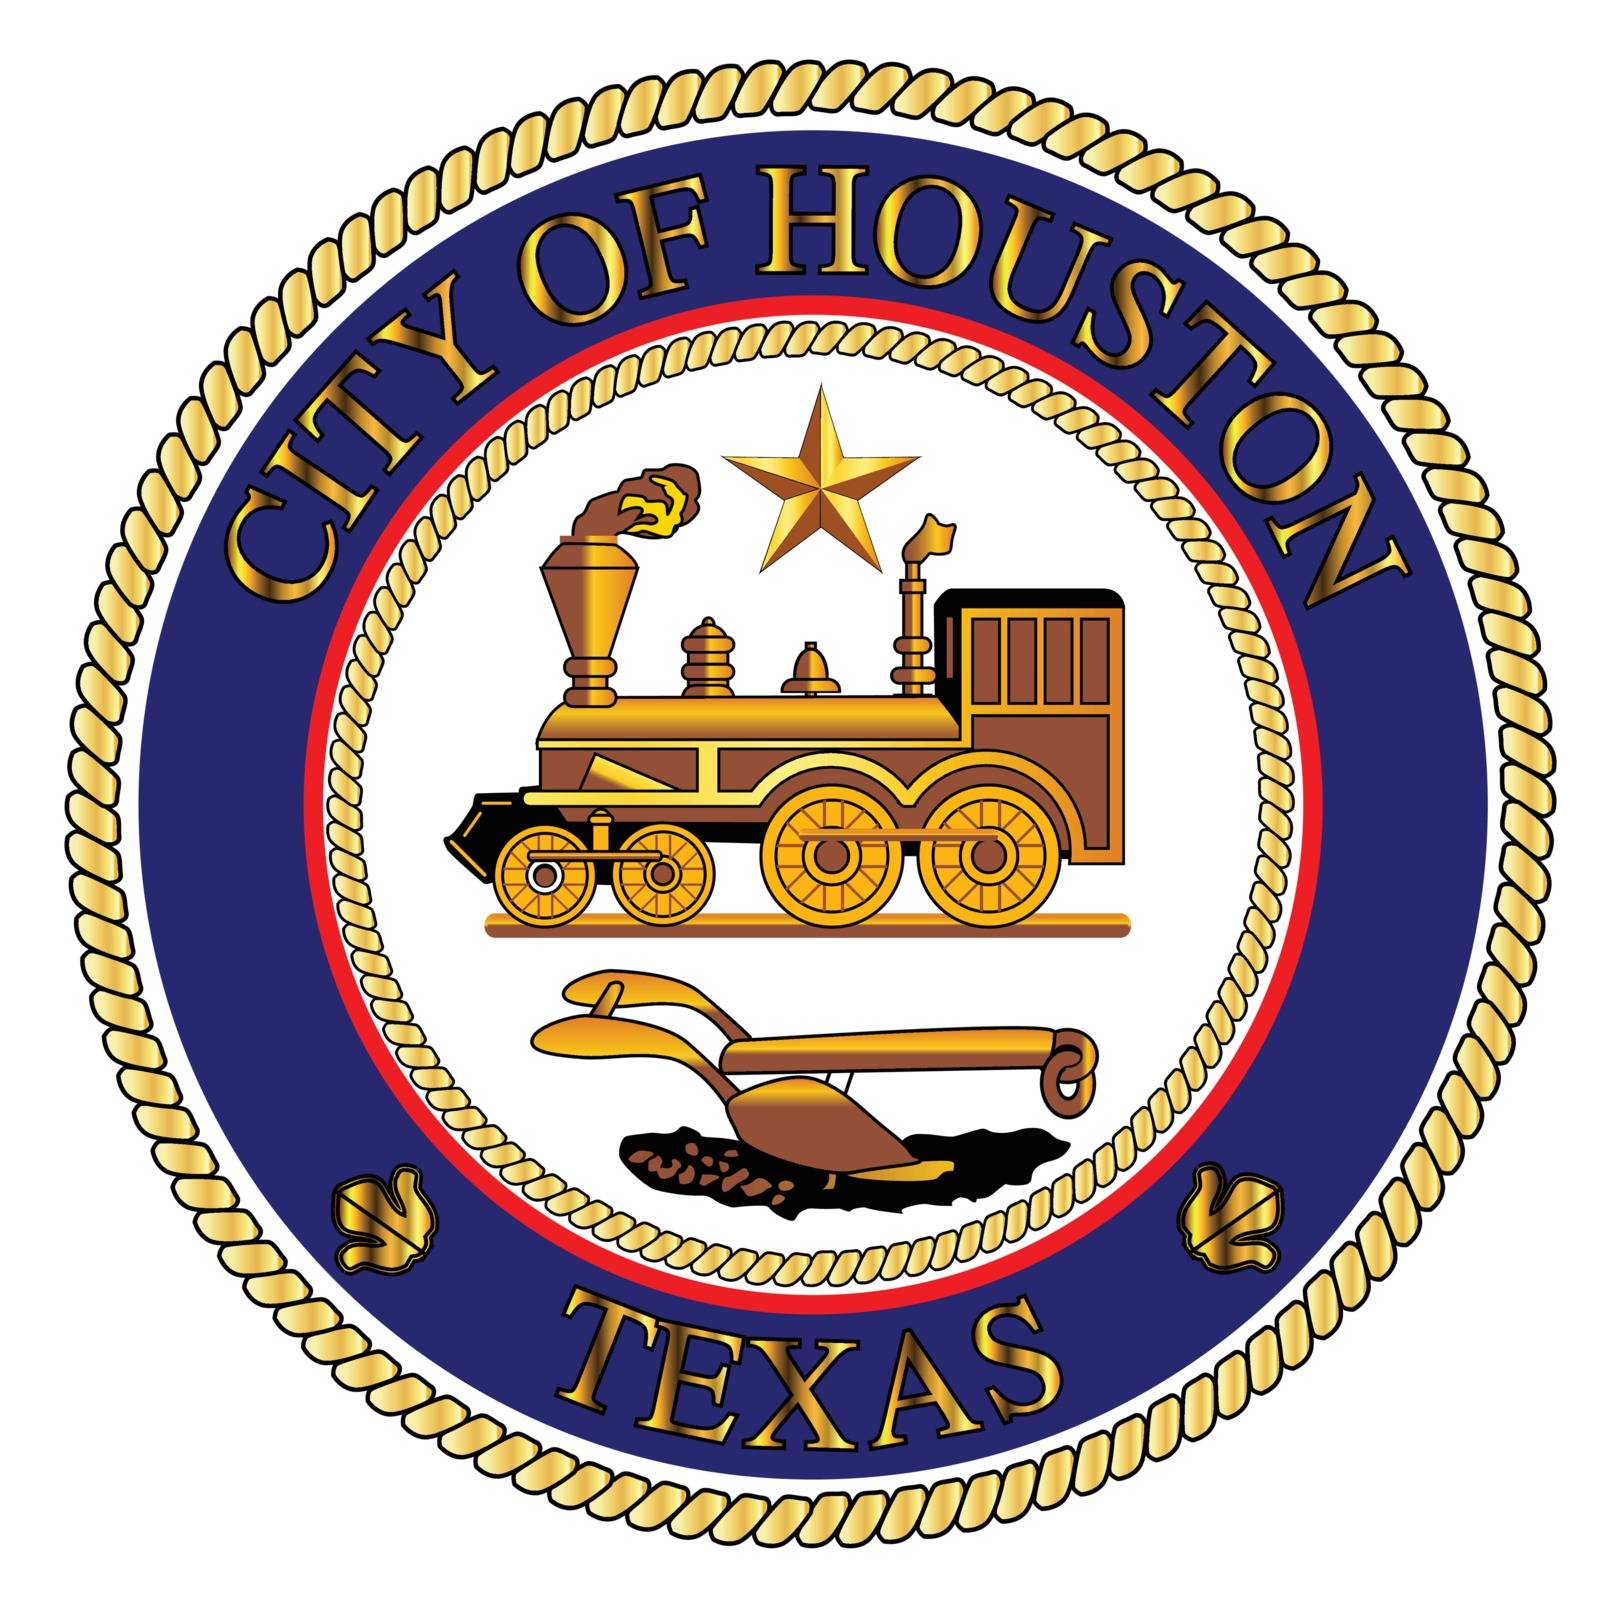 The seal as adopted by the city of Houston